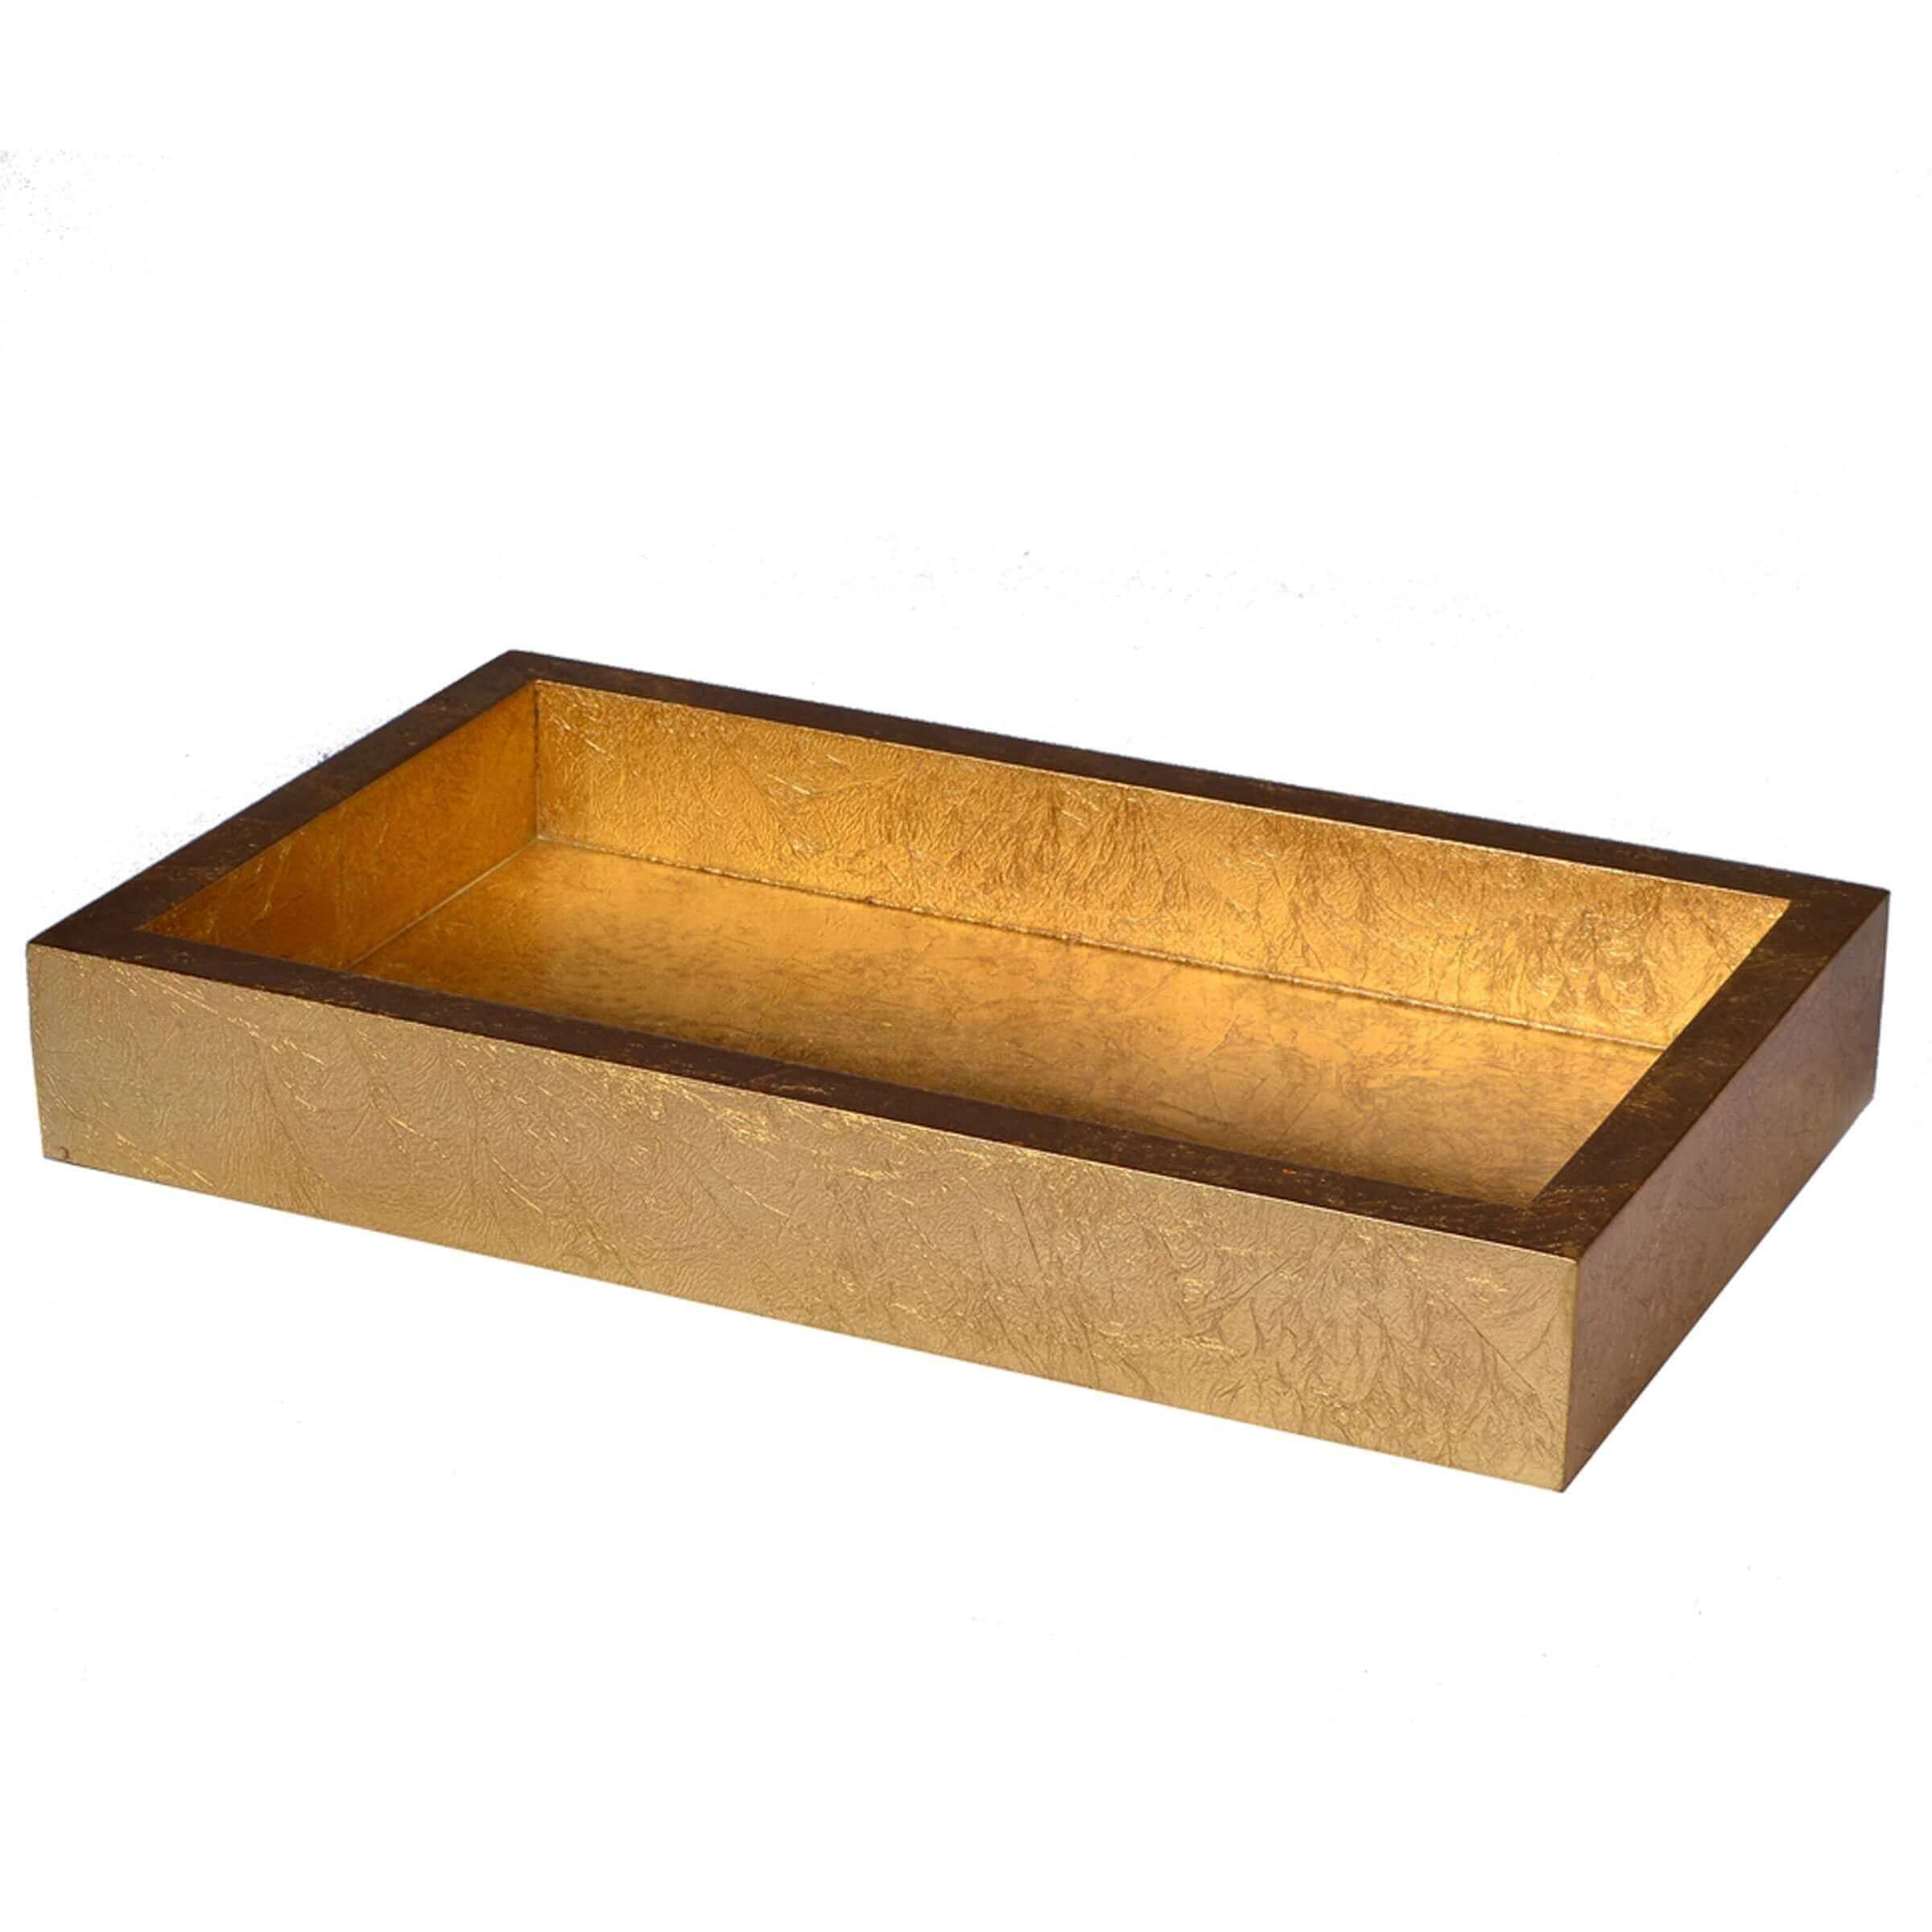 Mike + Ally - EOS Gold Vanity tray - 32094G - Gold - 